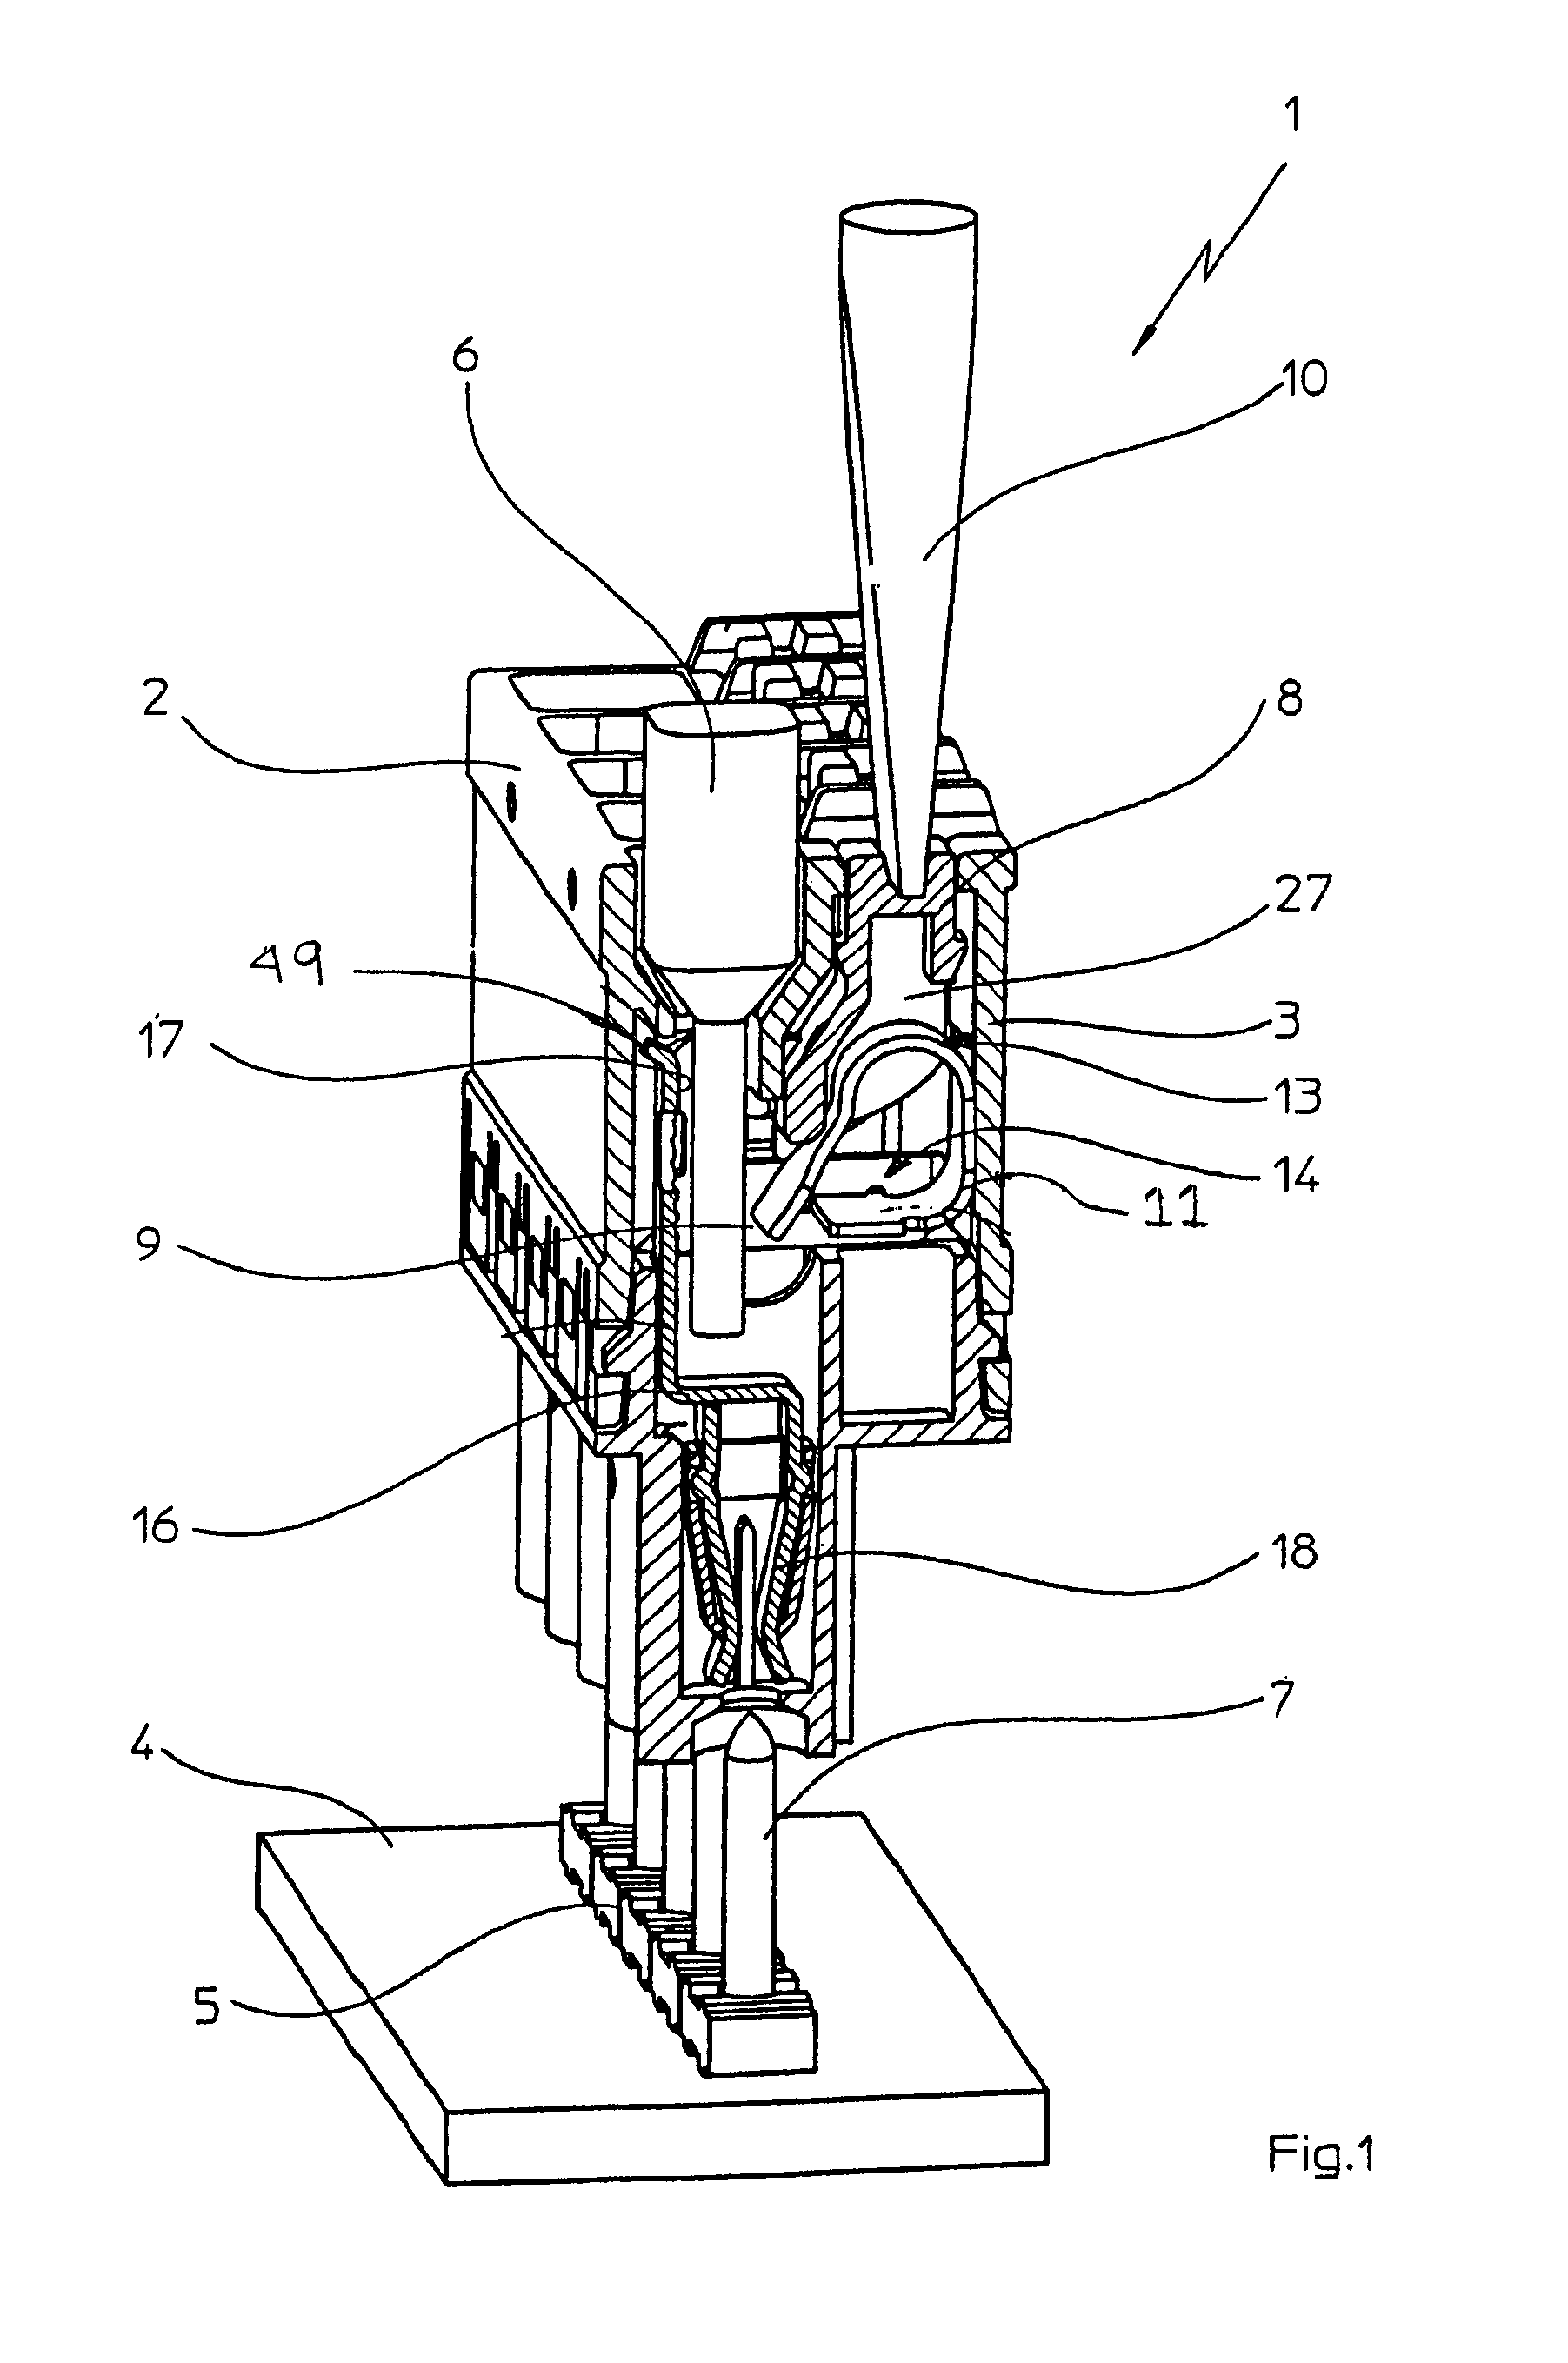 Connecting terminal for printed circuit boards